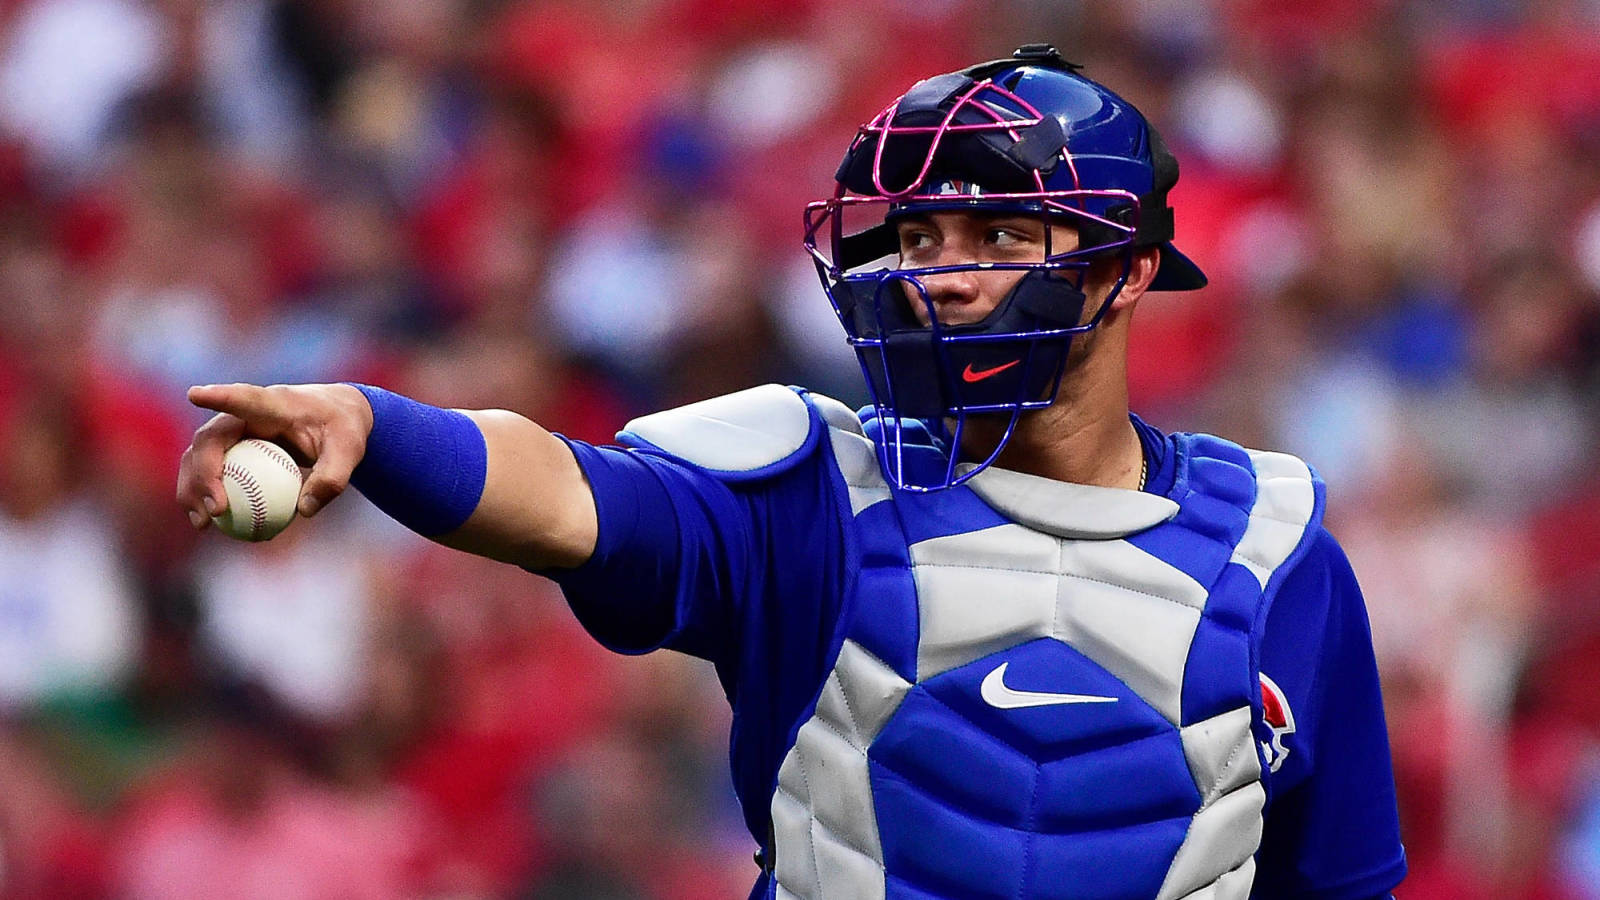 Willson Contreras open to the Cubs building around him